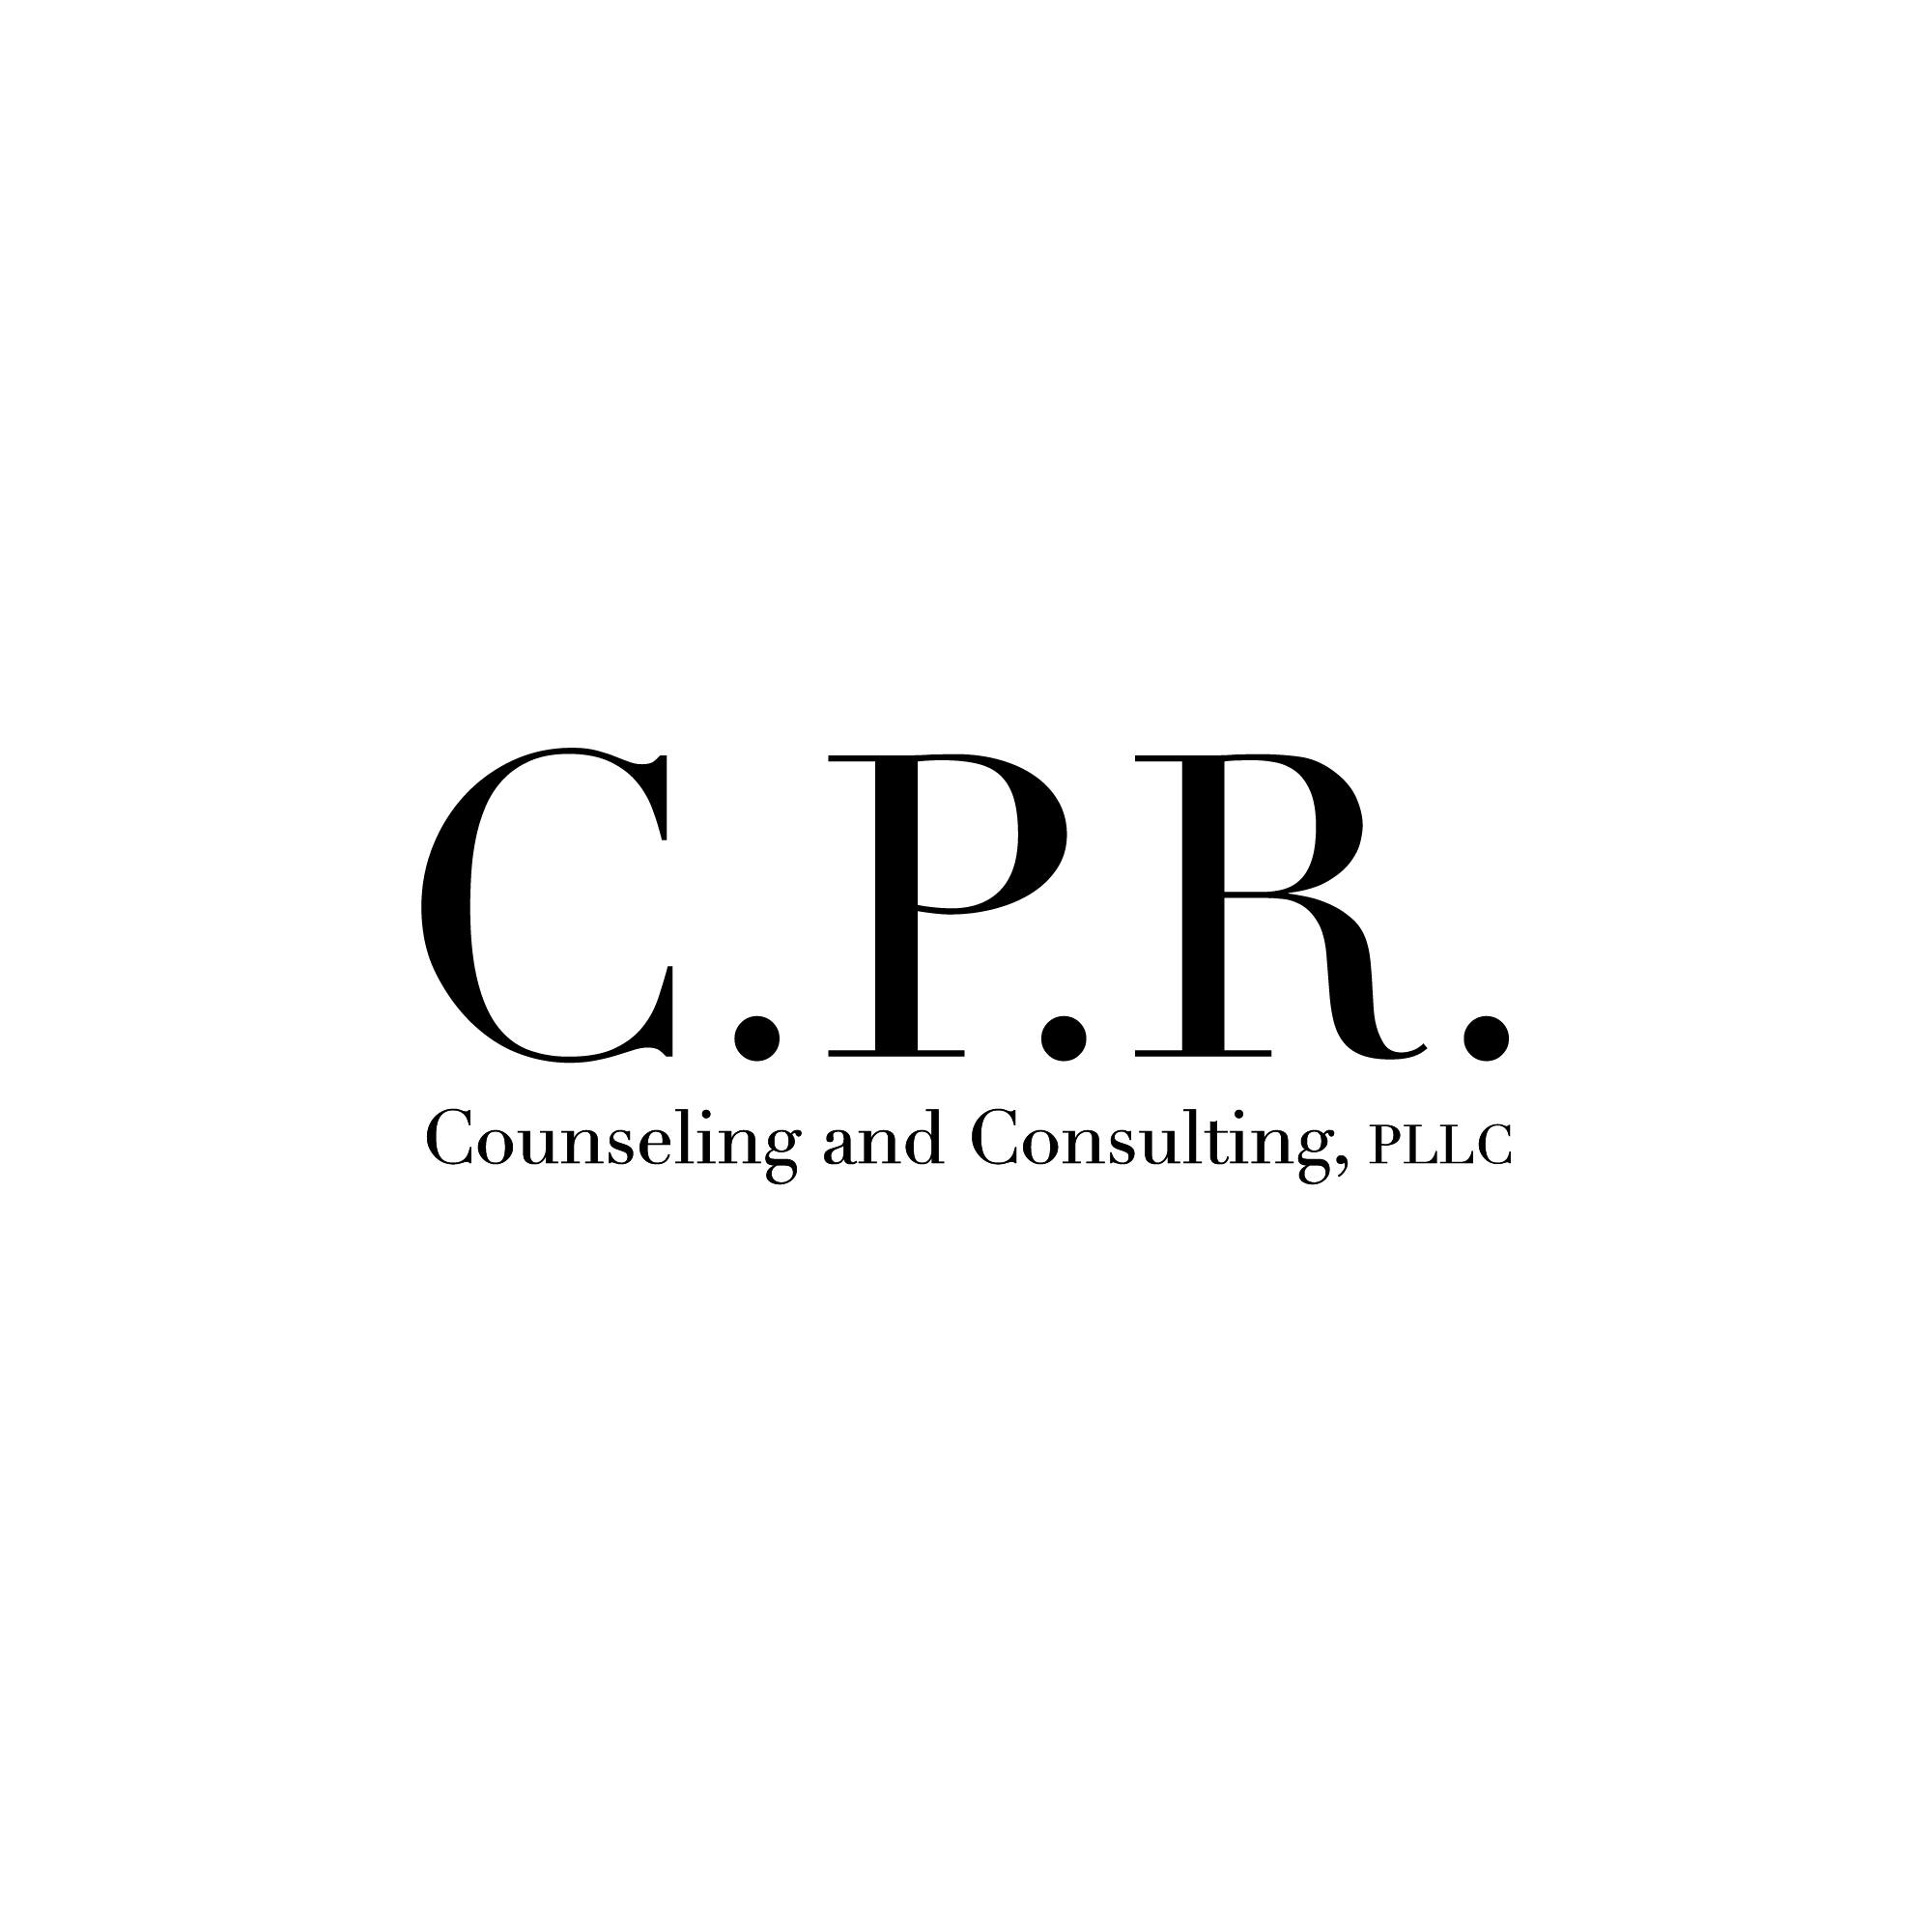 CPR Counseling & Consulting PLLC